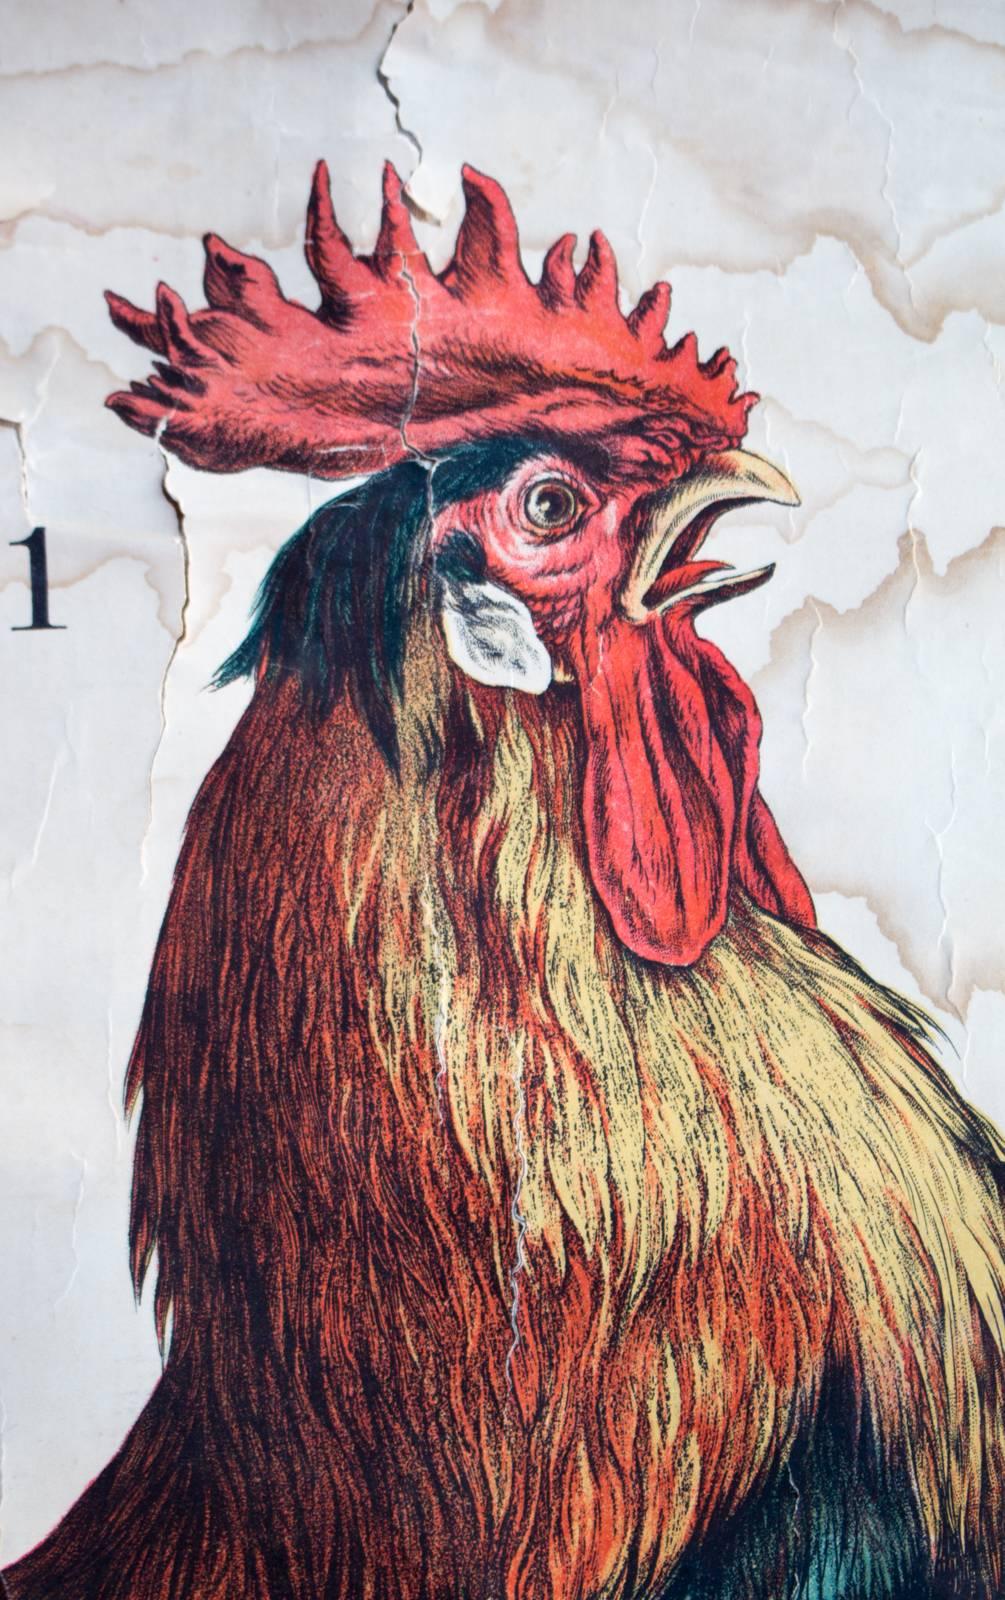 Other Chicken, Engleders Wall Charts, Lithograph by J. F. Schreiber, 1893